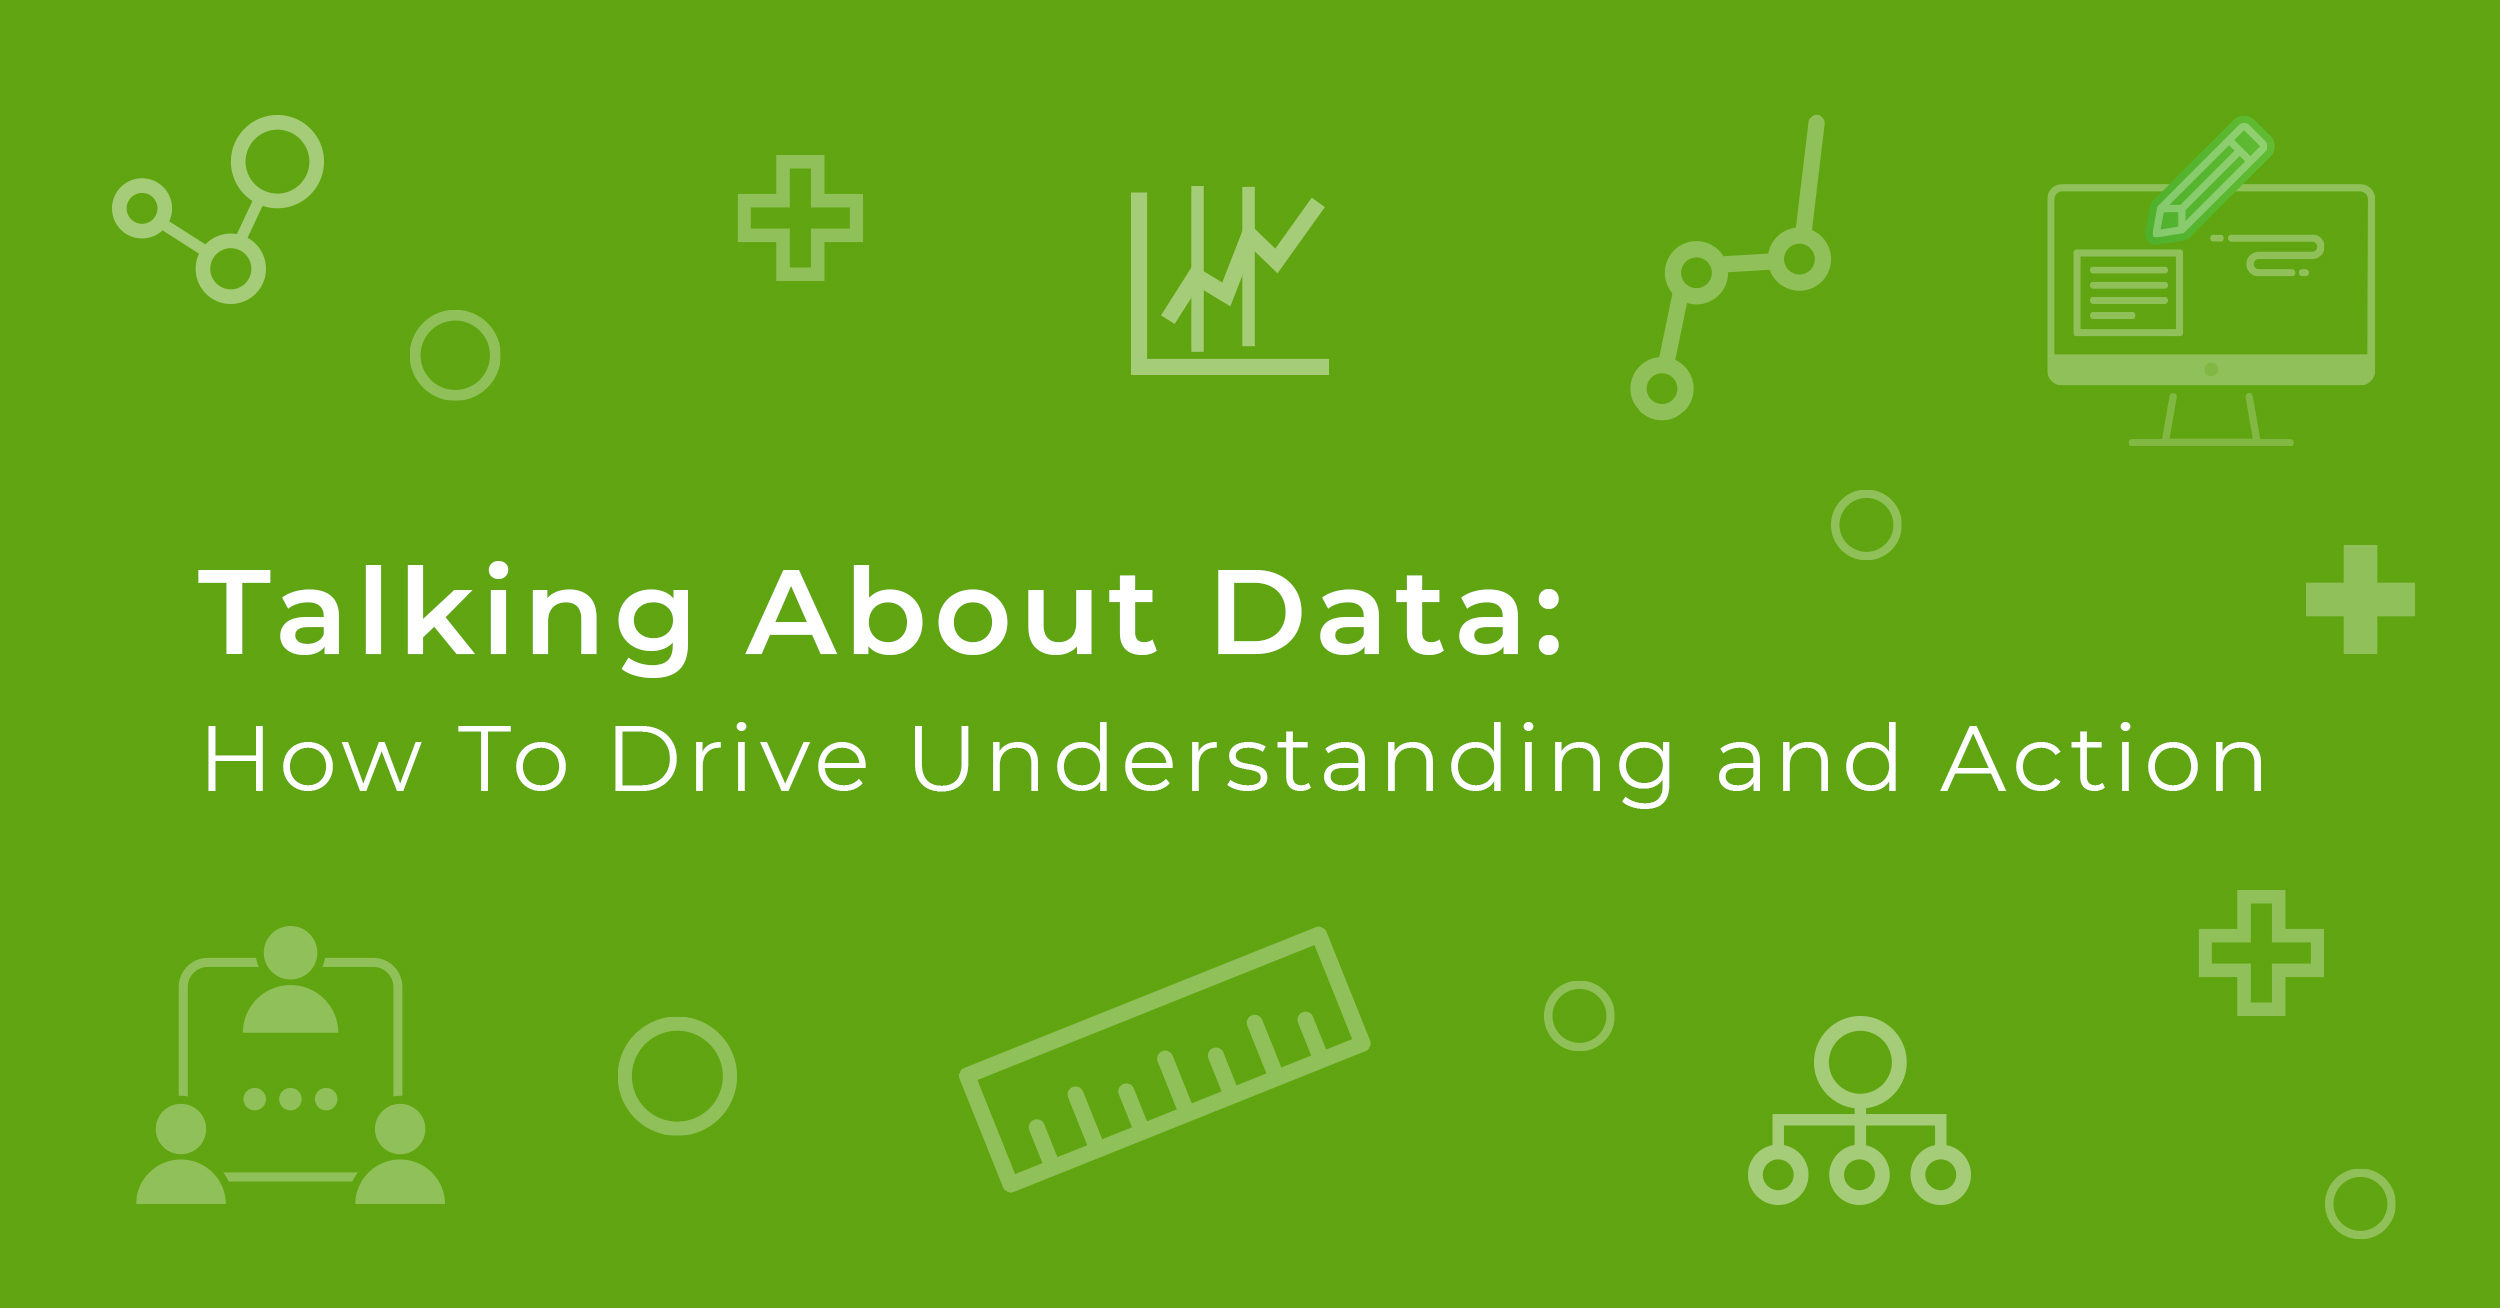 Featured image for “Talking About Data: How To Drive Understanding and Action”